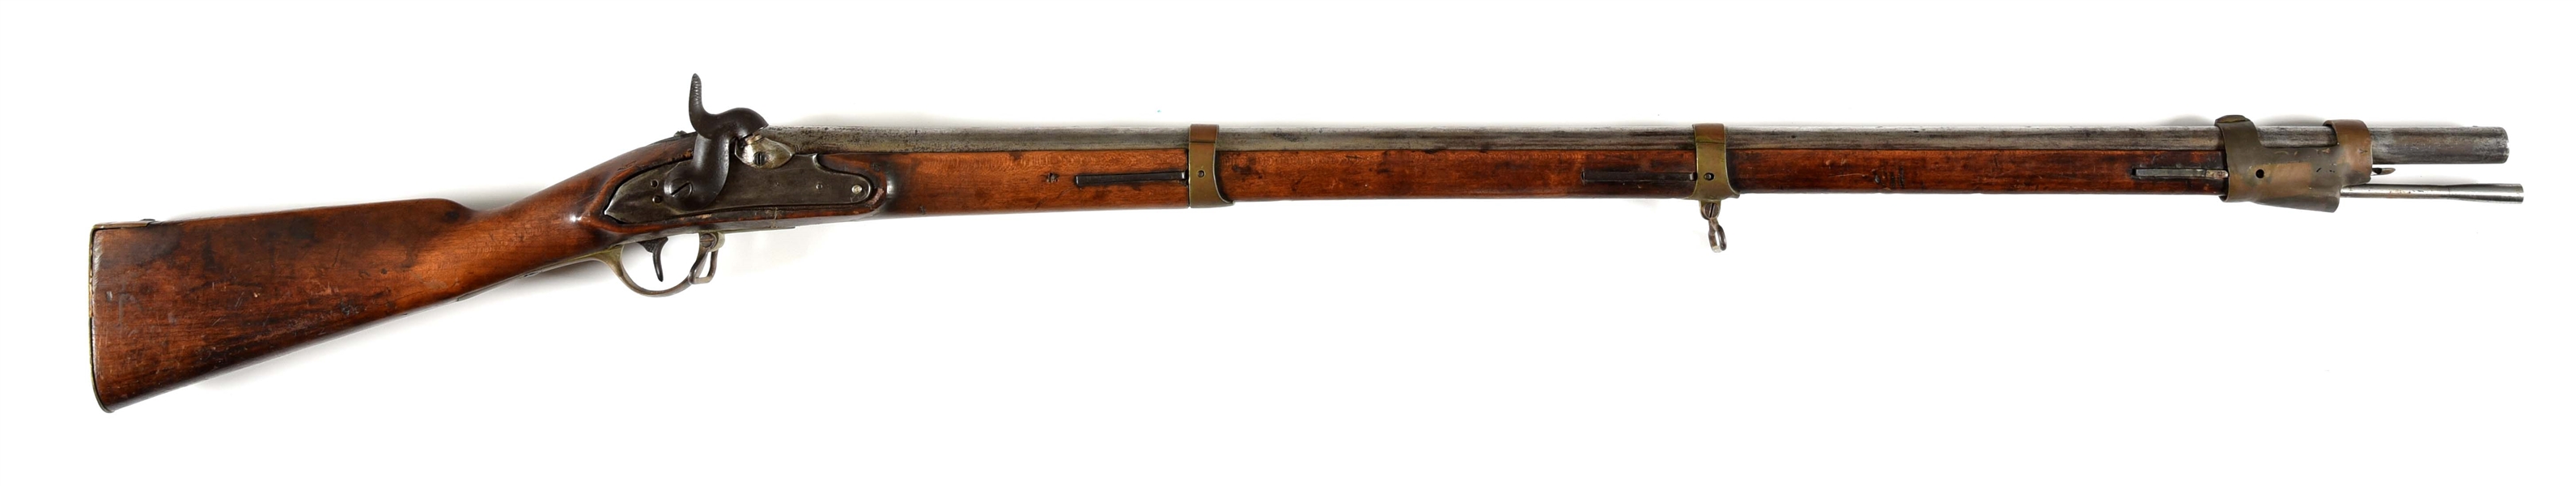 (A) UNIT MARKED MODEL 1809 POTSDAM PERCUSSION MUSKET.